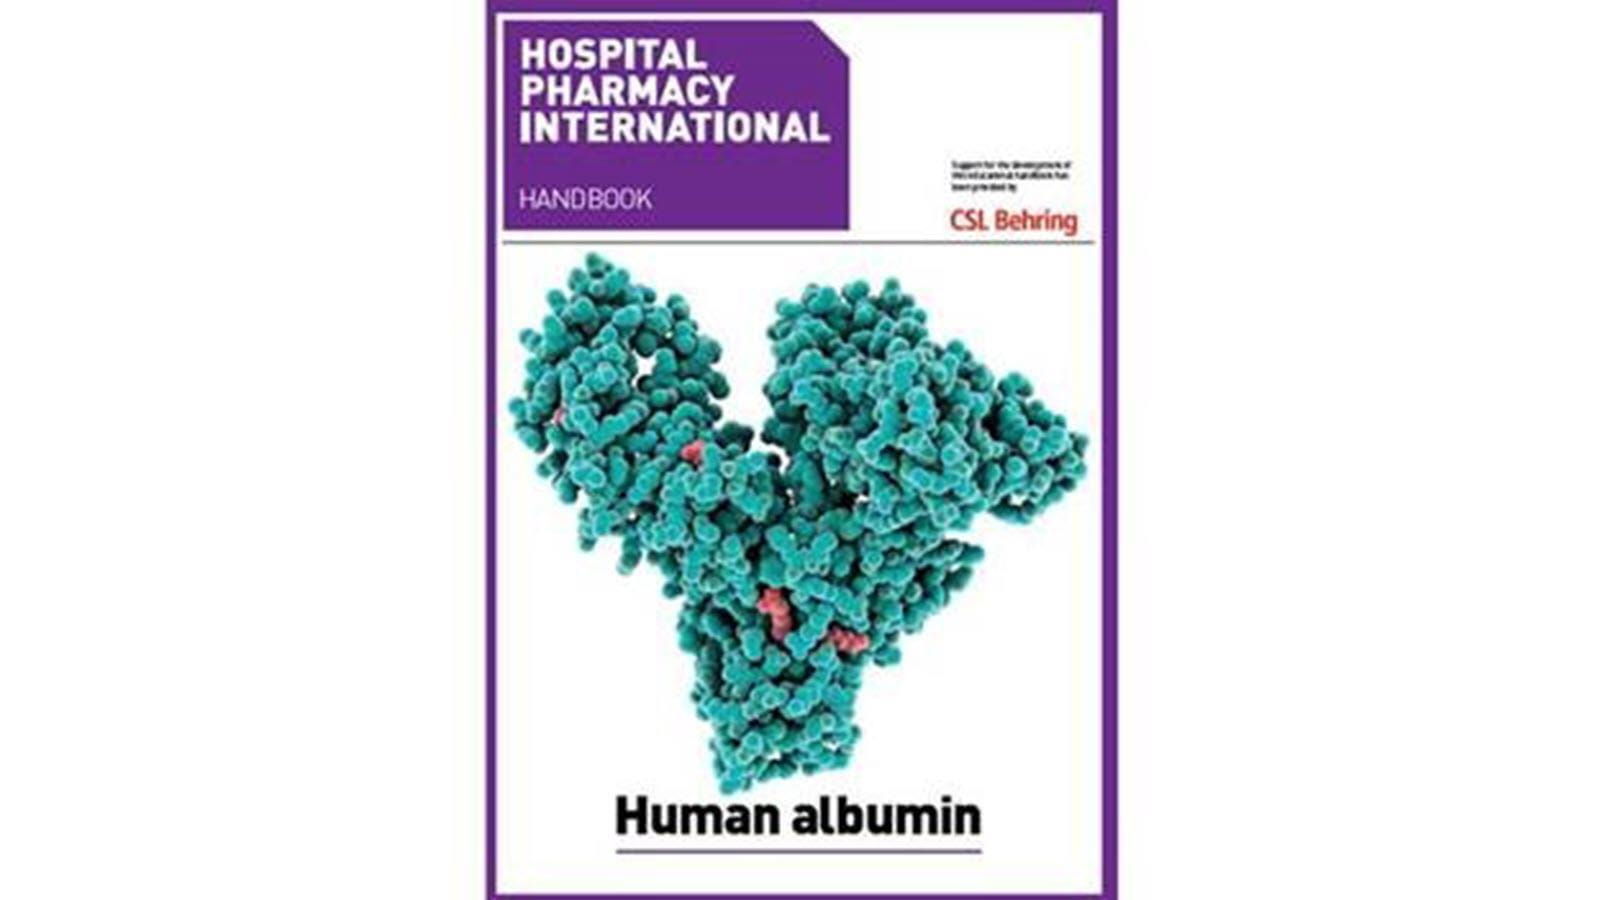 Albumin guide front cover